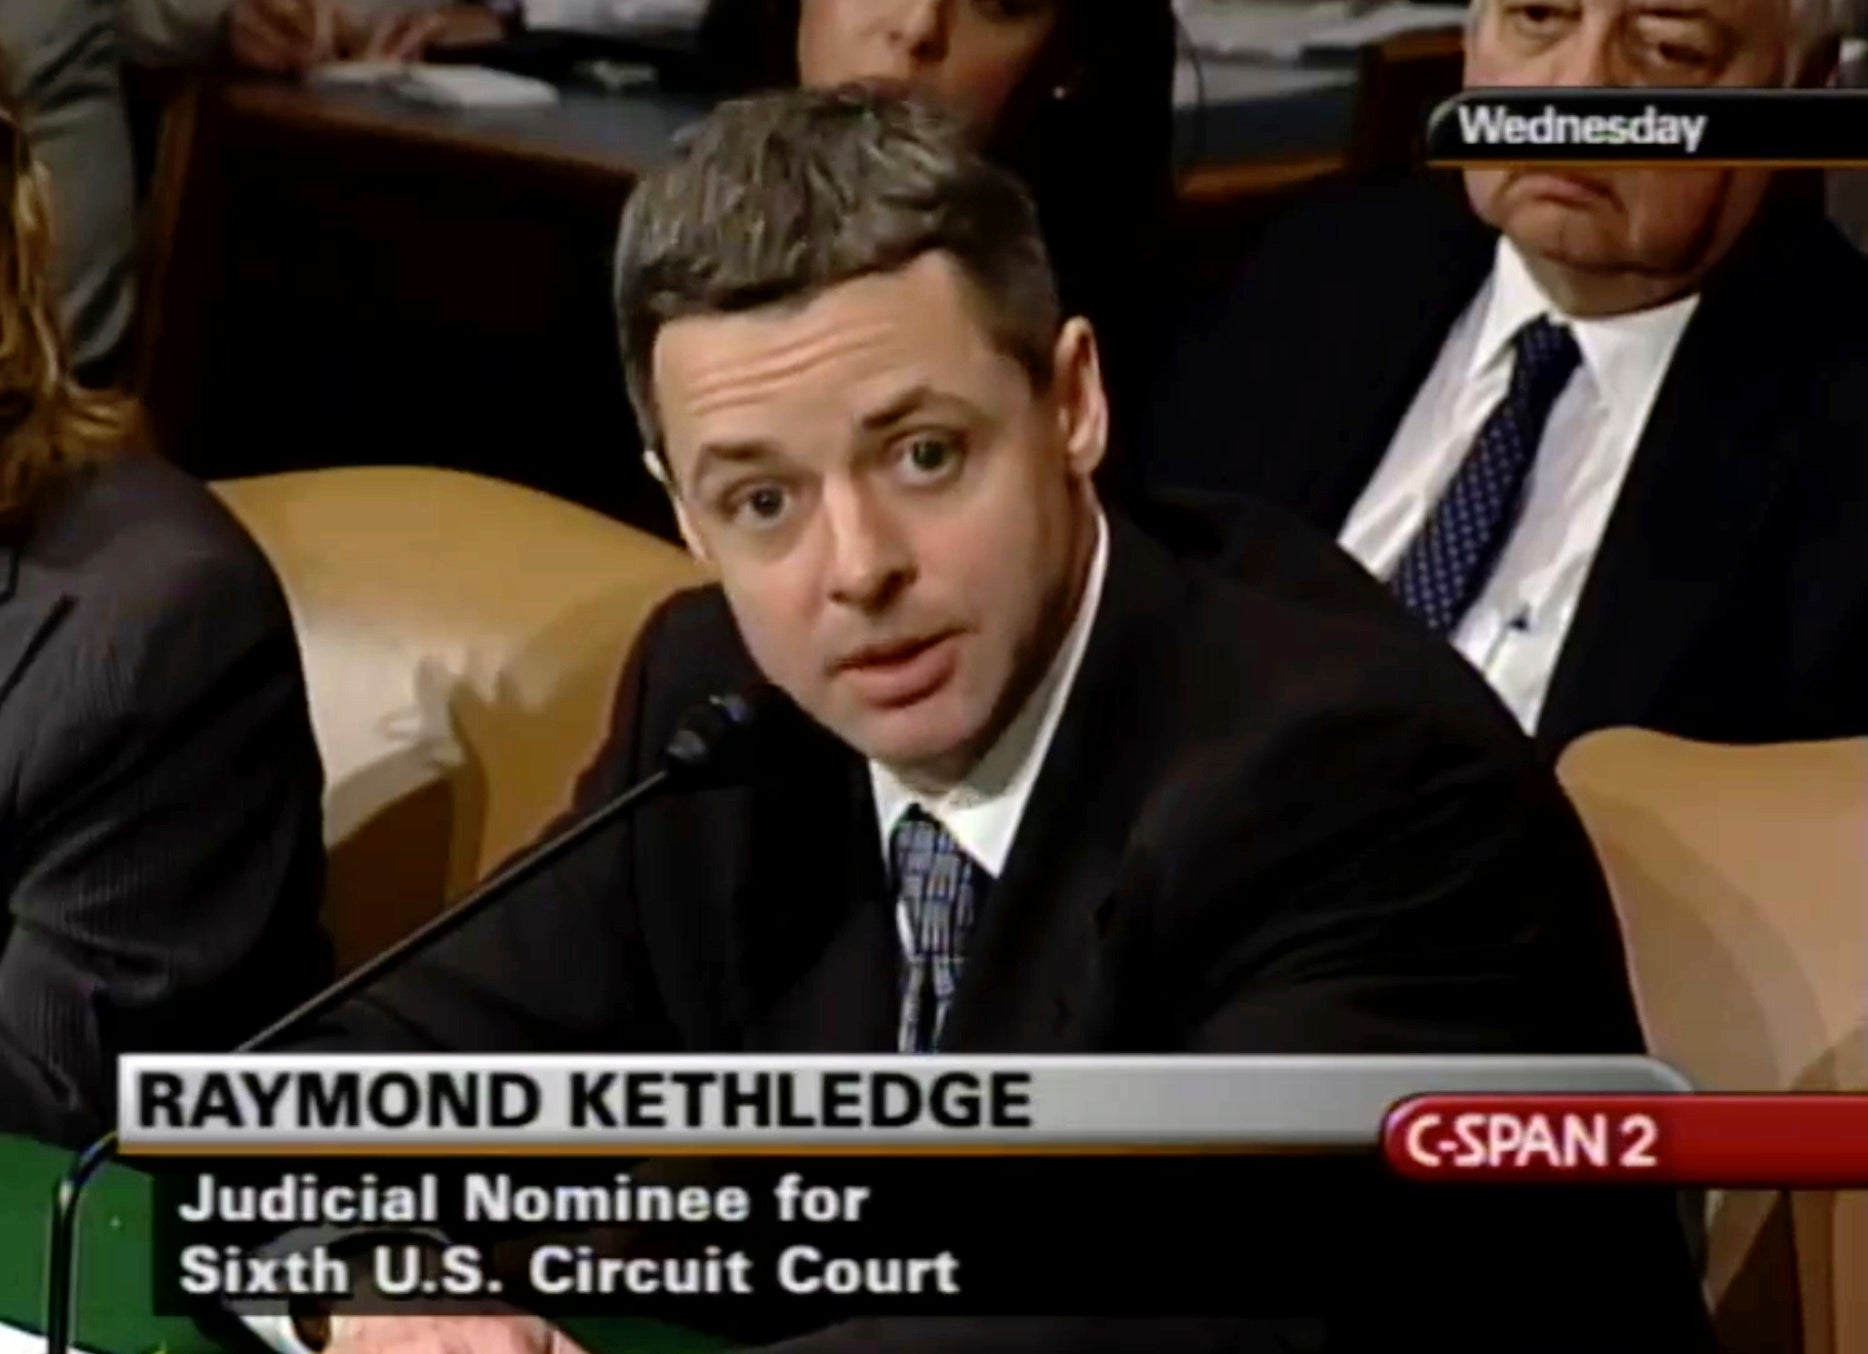 Raymond Kethledge testifies during his confirmation hearing for the Sixth US Circuit Court on Capitol Hill in Washington.